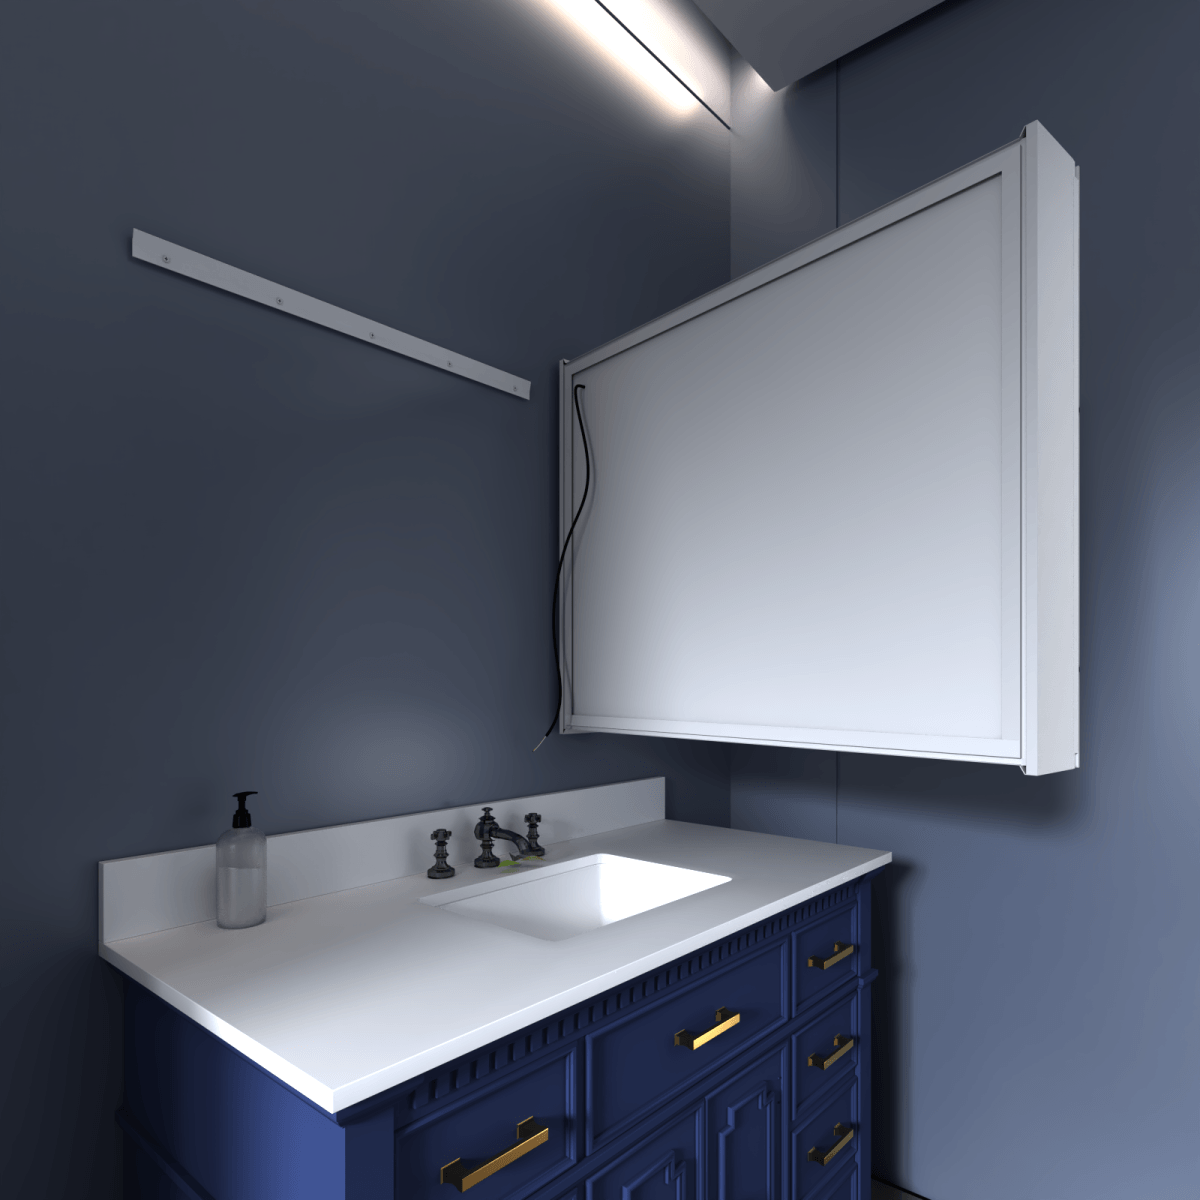 ExBrite 36" W x 30" H LED Lighted Bathroom Medicine Cabinet with Mirror Recessed or Surface Mounted LED Medicine Cabinet - ExBriteUSA